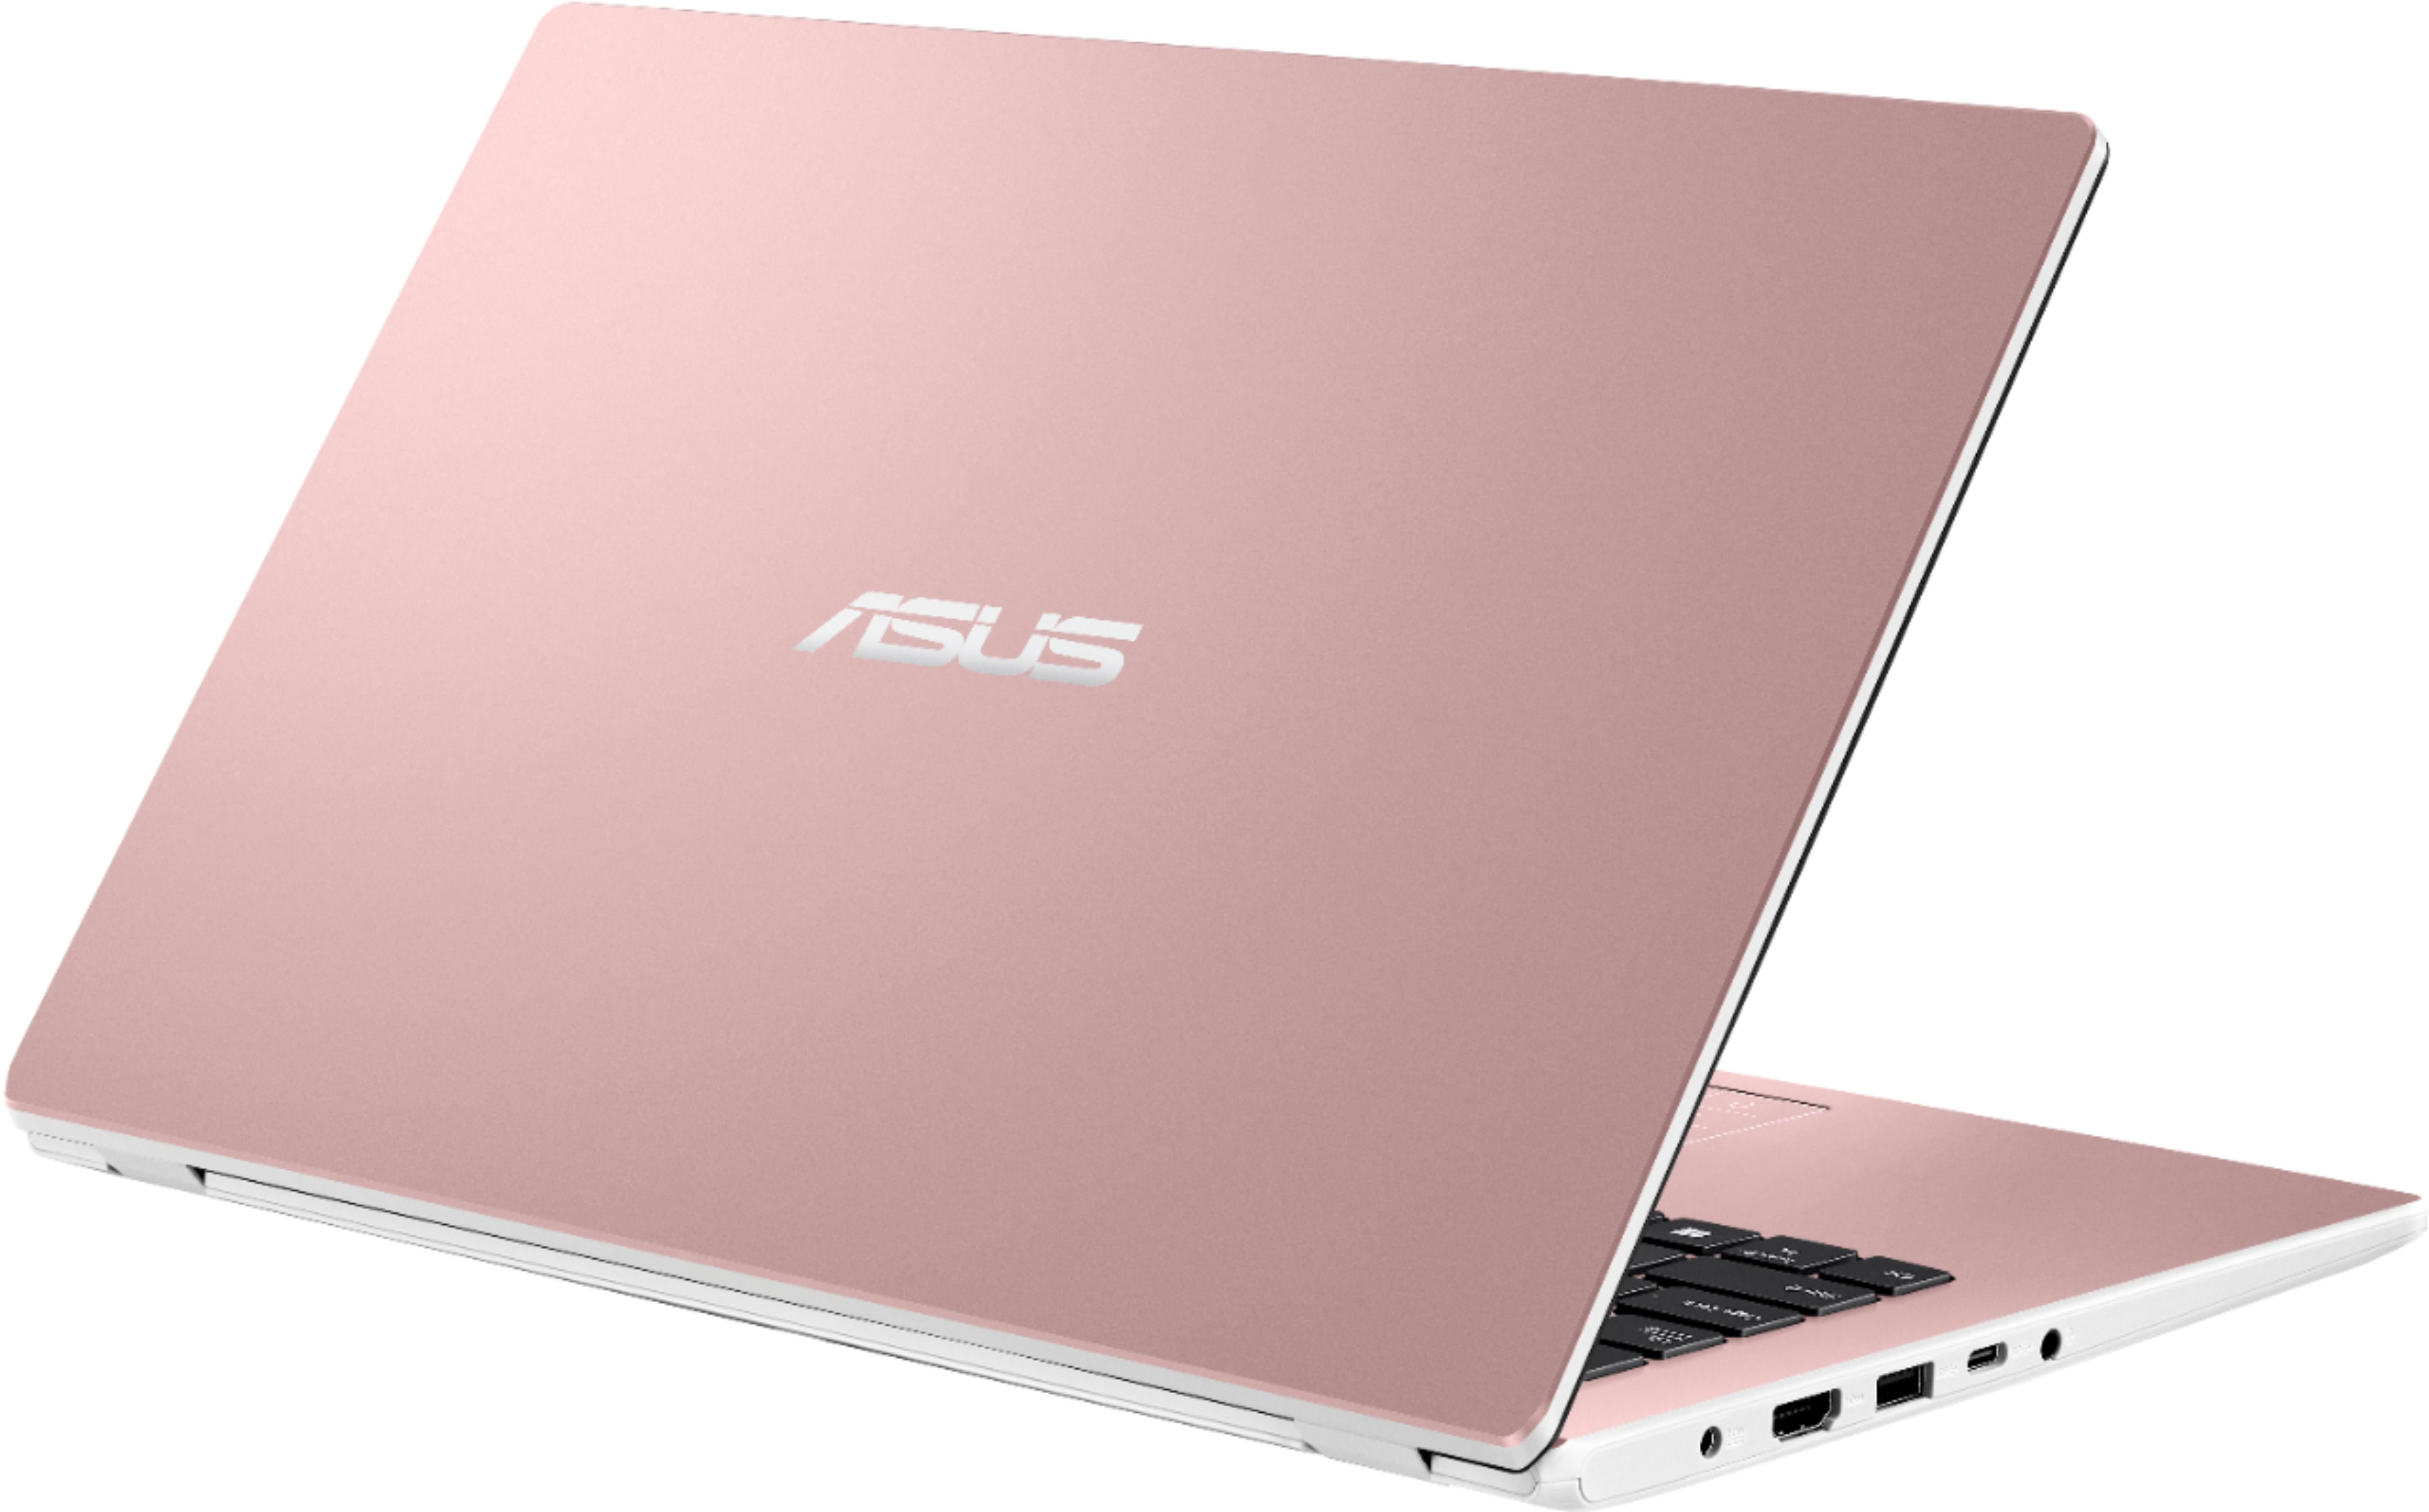 Questions And Answers Asus 140 Laptop Intel Celeron N4020 4gb Memory 64gb Emmc Rose Gold 8034